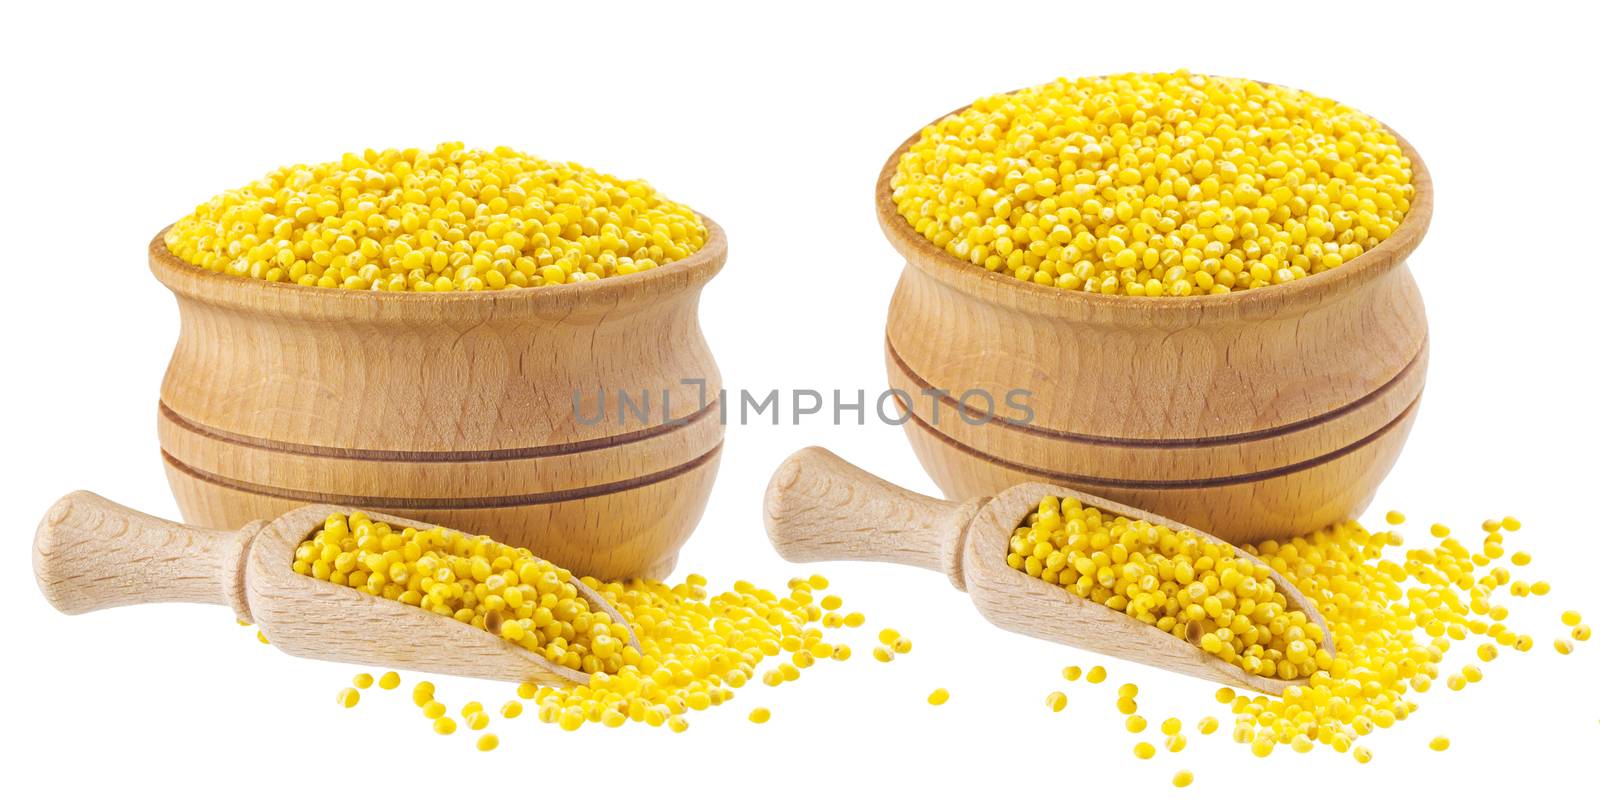 Isolated millet seeds. Wooden bowl and scoop with millet groats on white background. Close-up. Collection